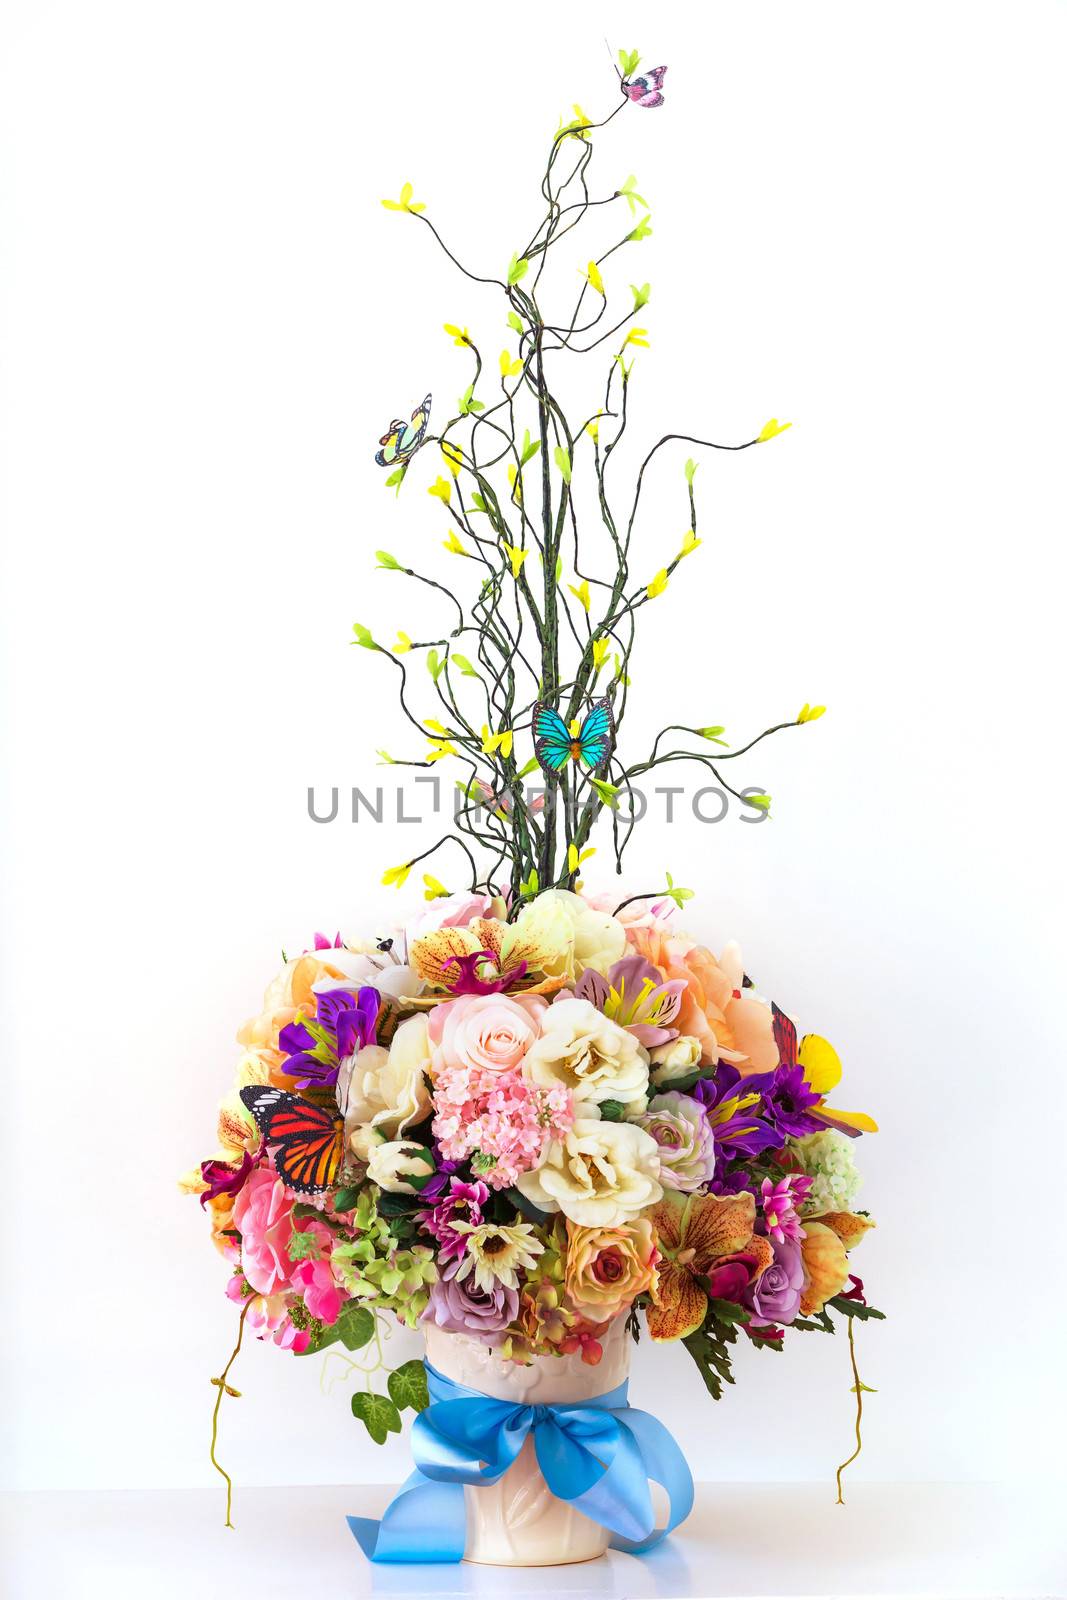 Bouquet of flowers by smuay